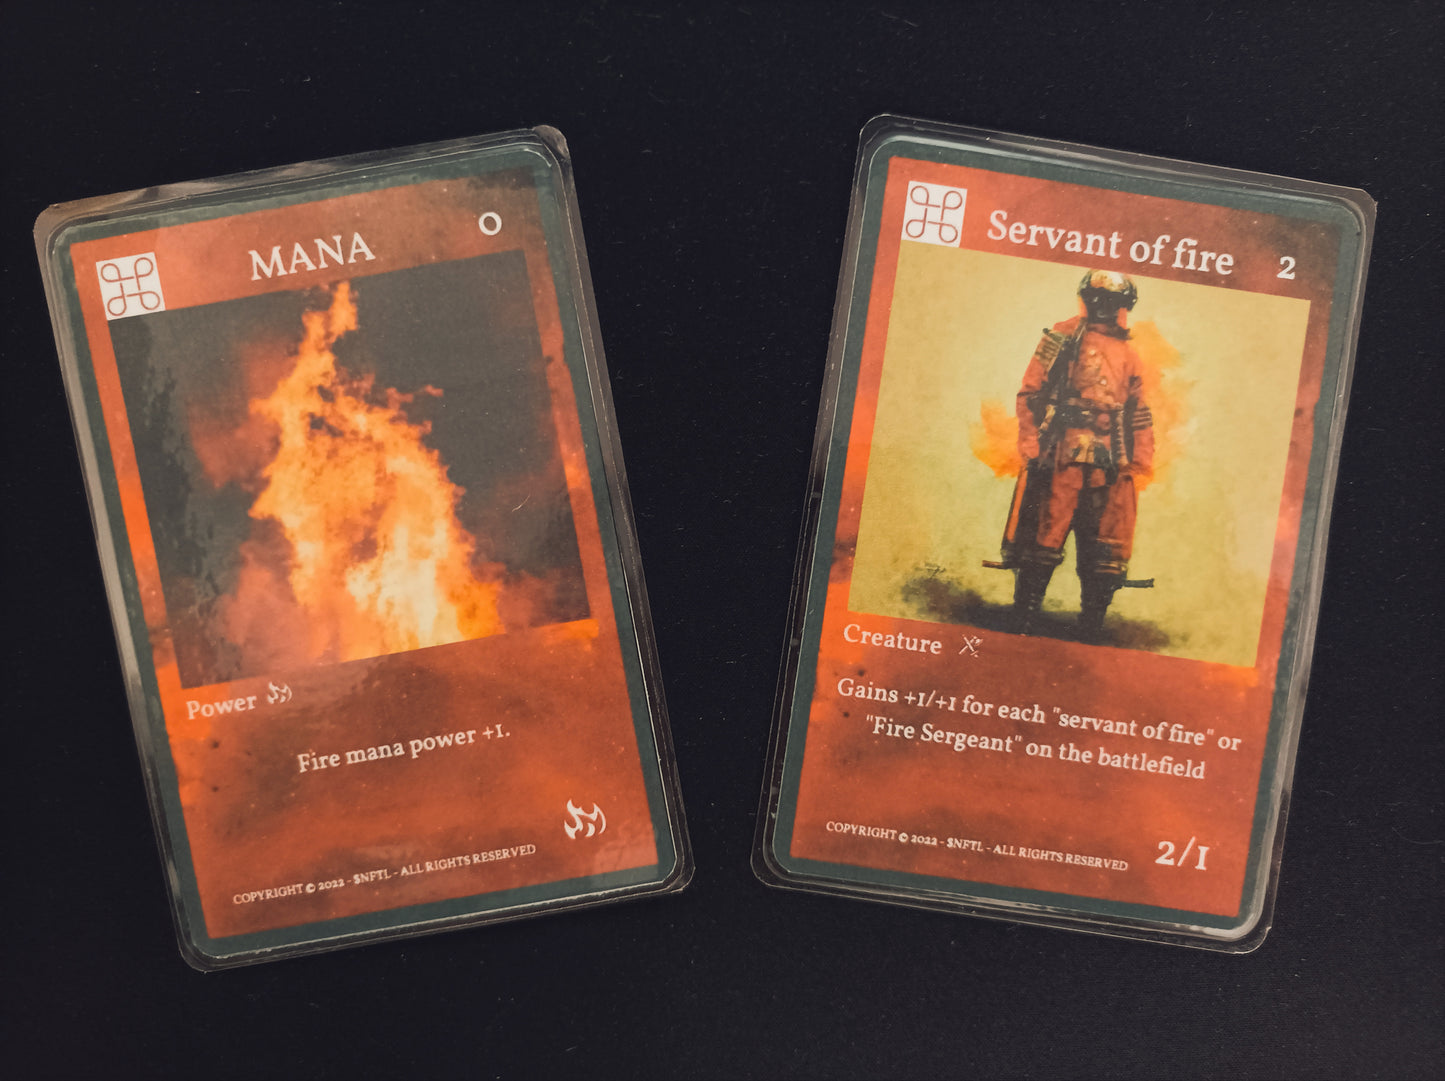 $NFTL Game cards : 1 Common CARD Servant of fire and 1 Common CARD FIRE MANA #1